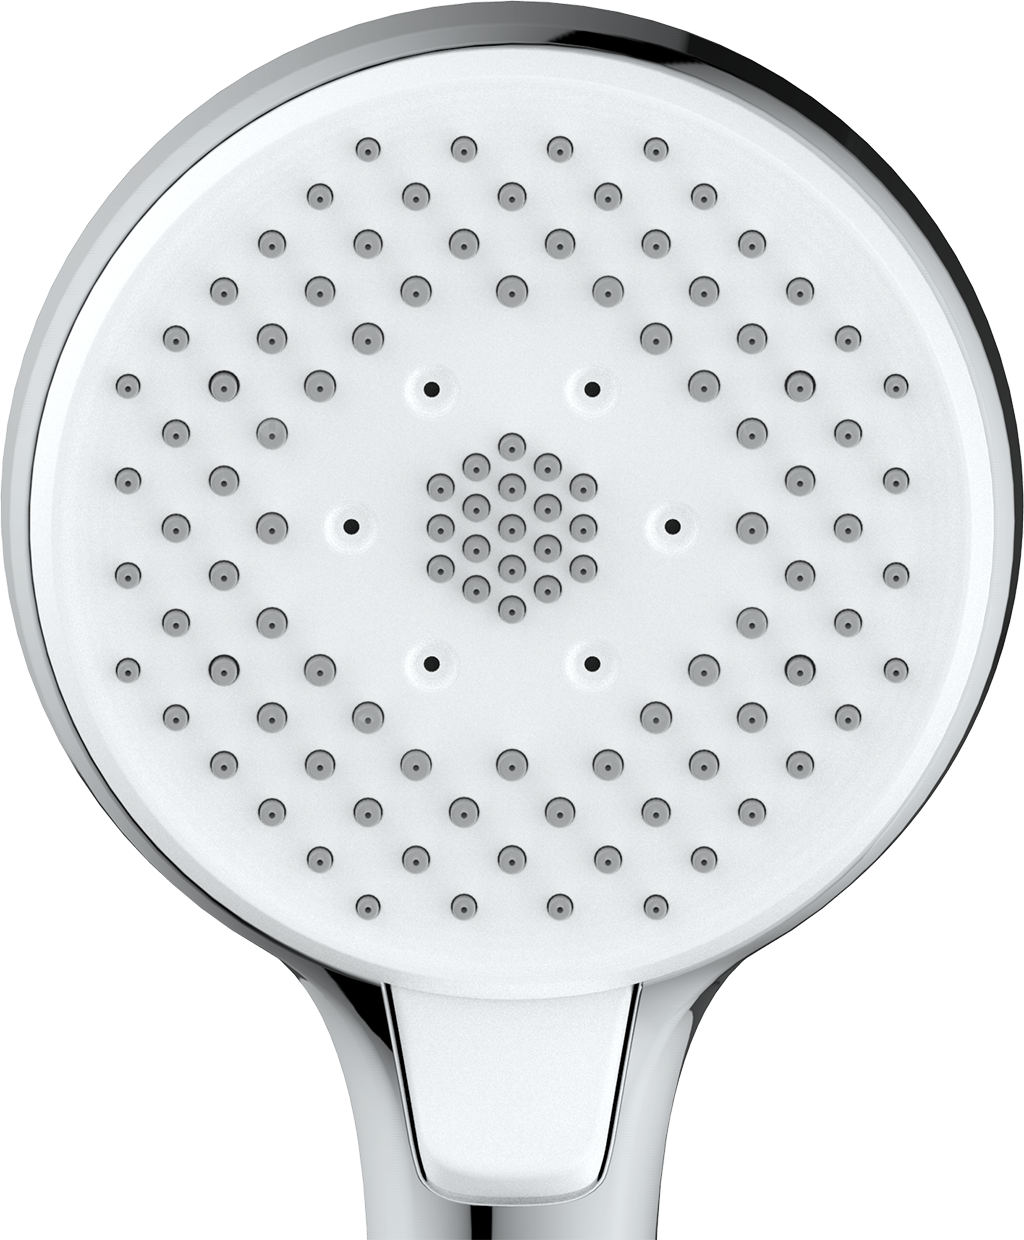 New style Saturate Storm Spray hand shower 714909 Water-saving-5